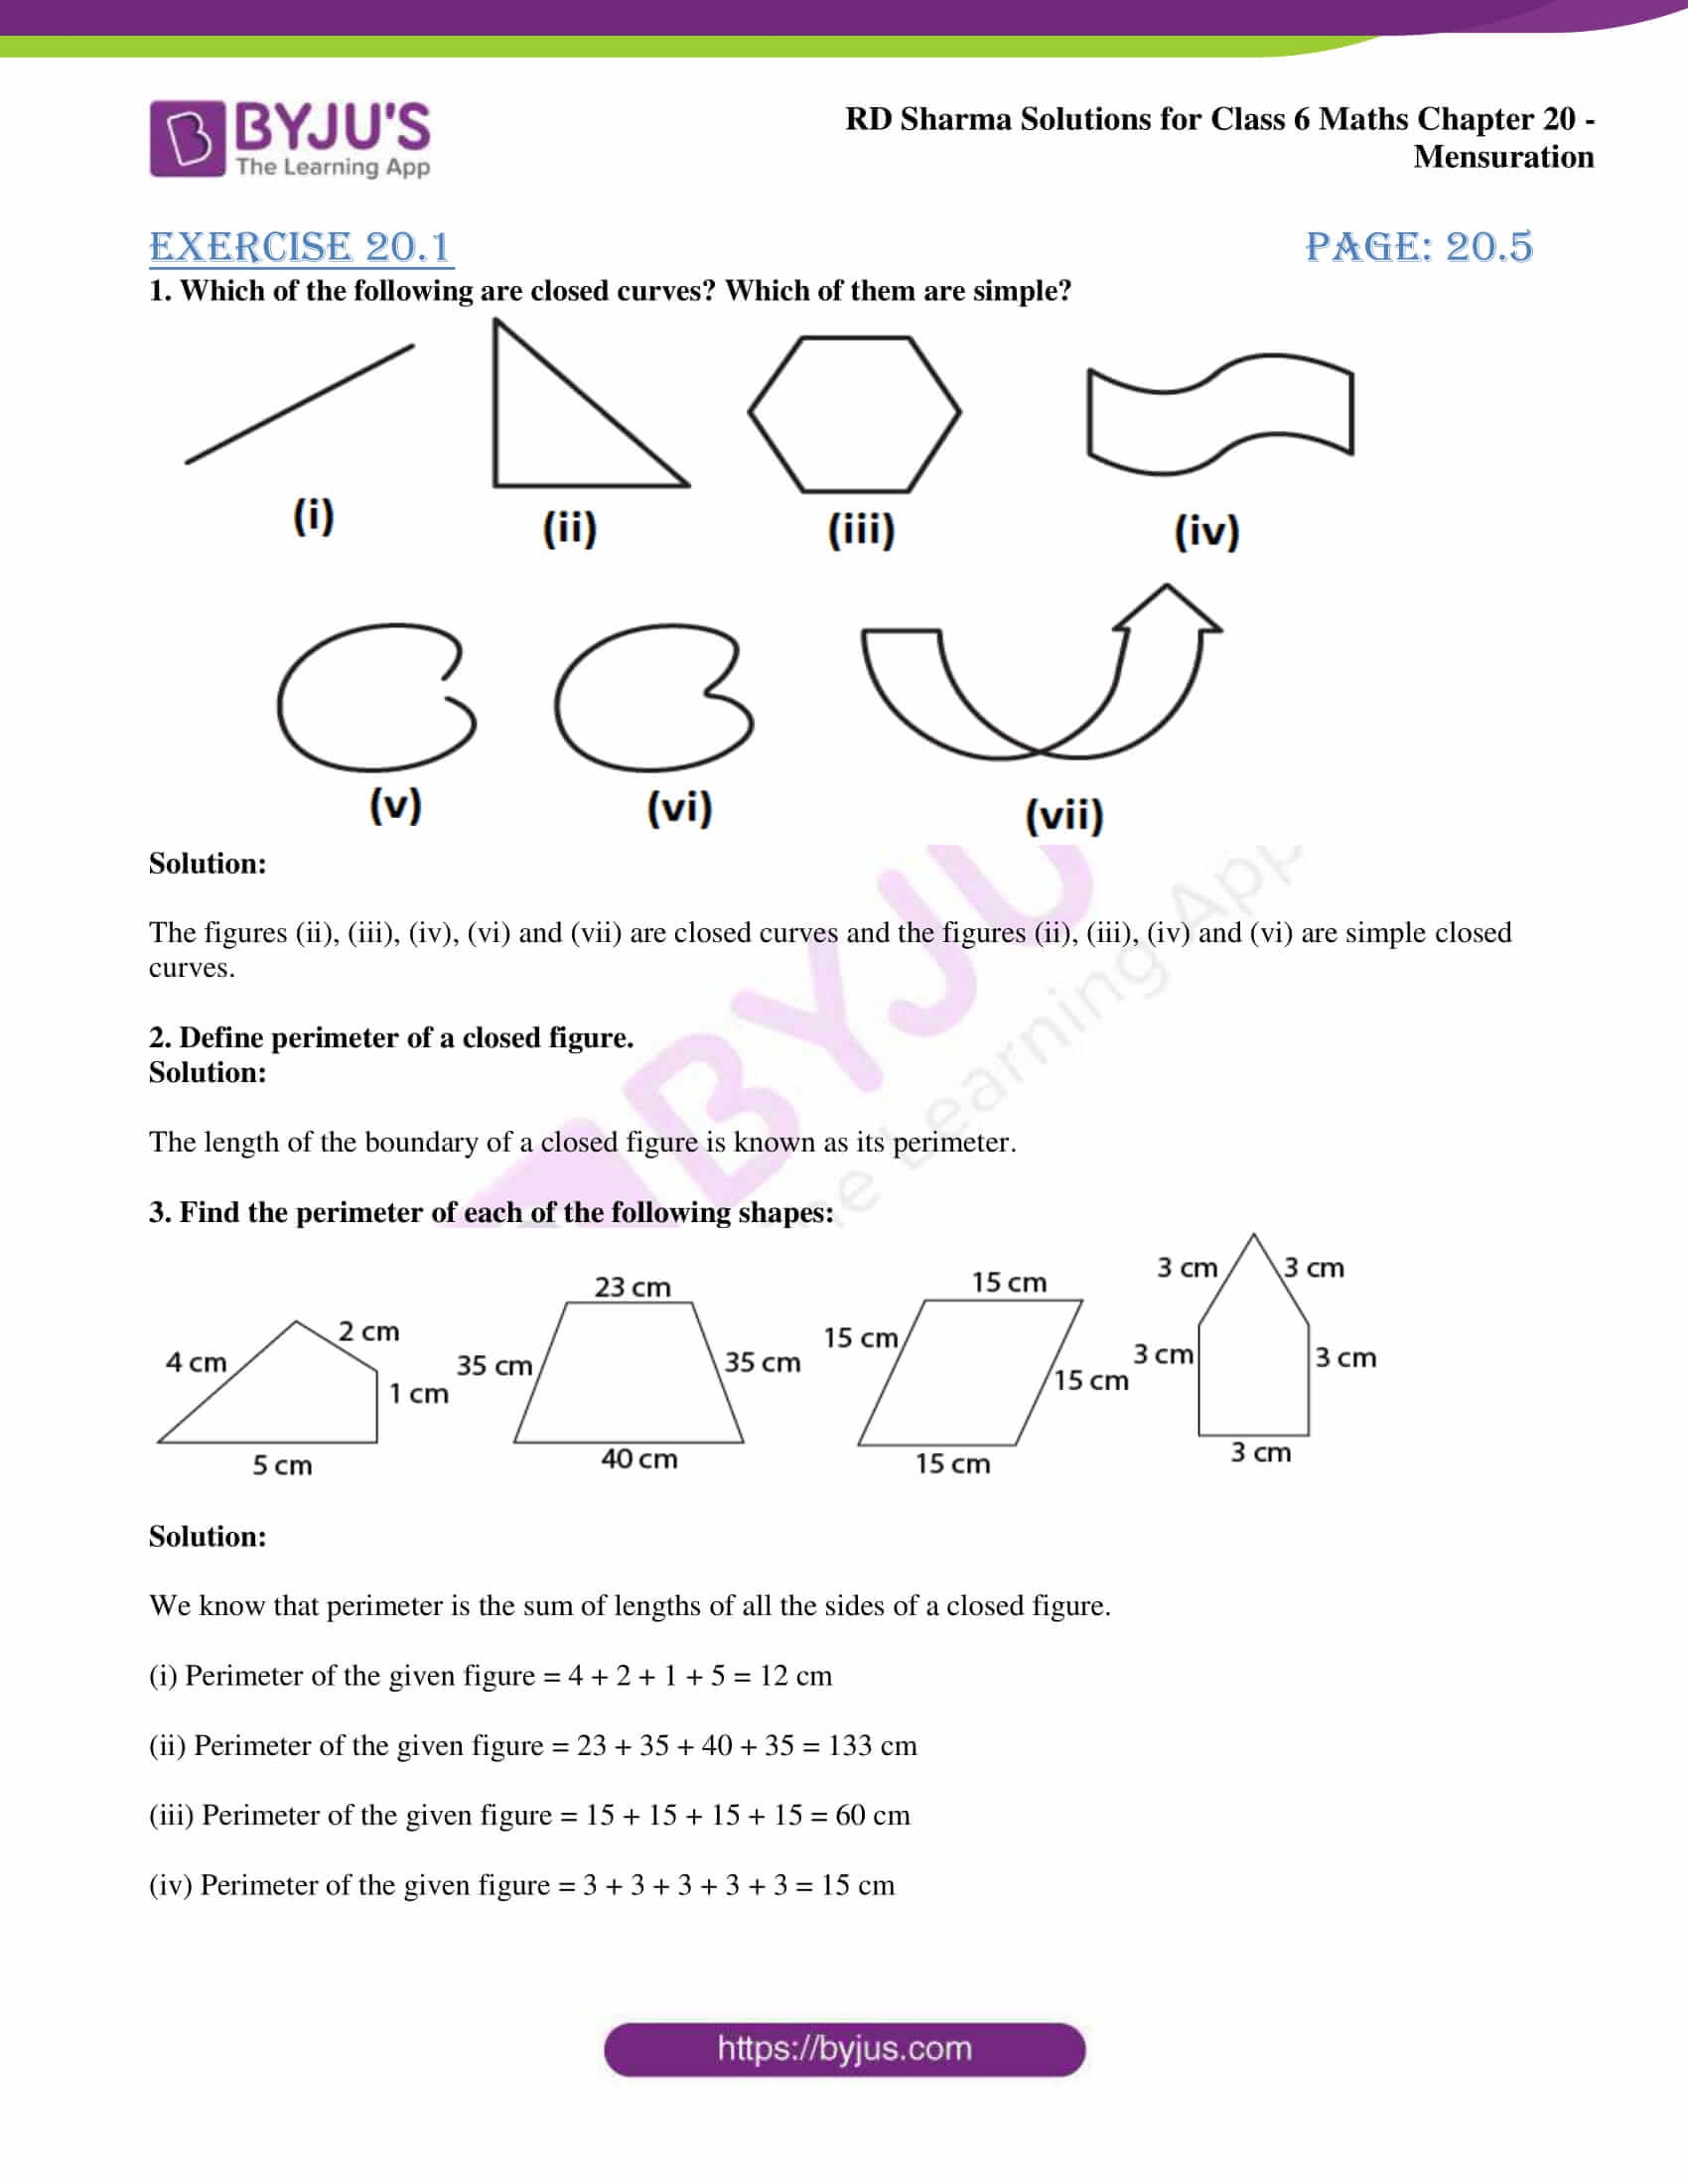 Cbse Class 6 Maths Mensuration Worksheets With Answers